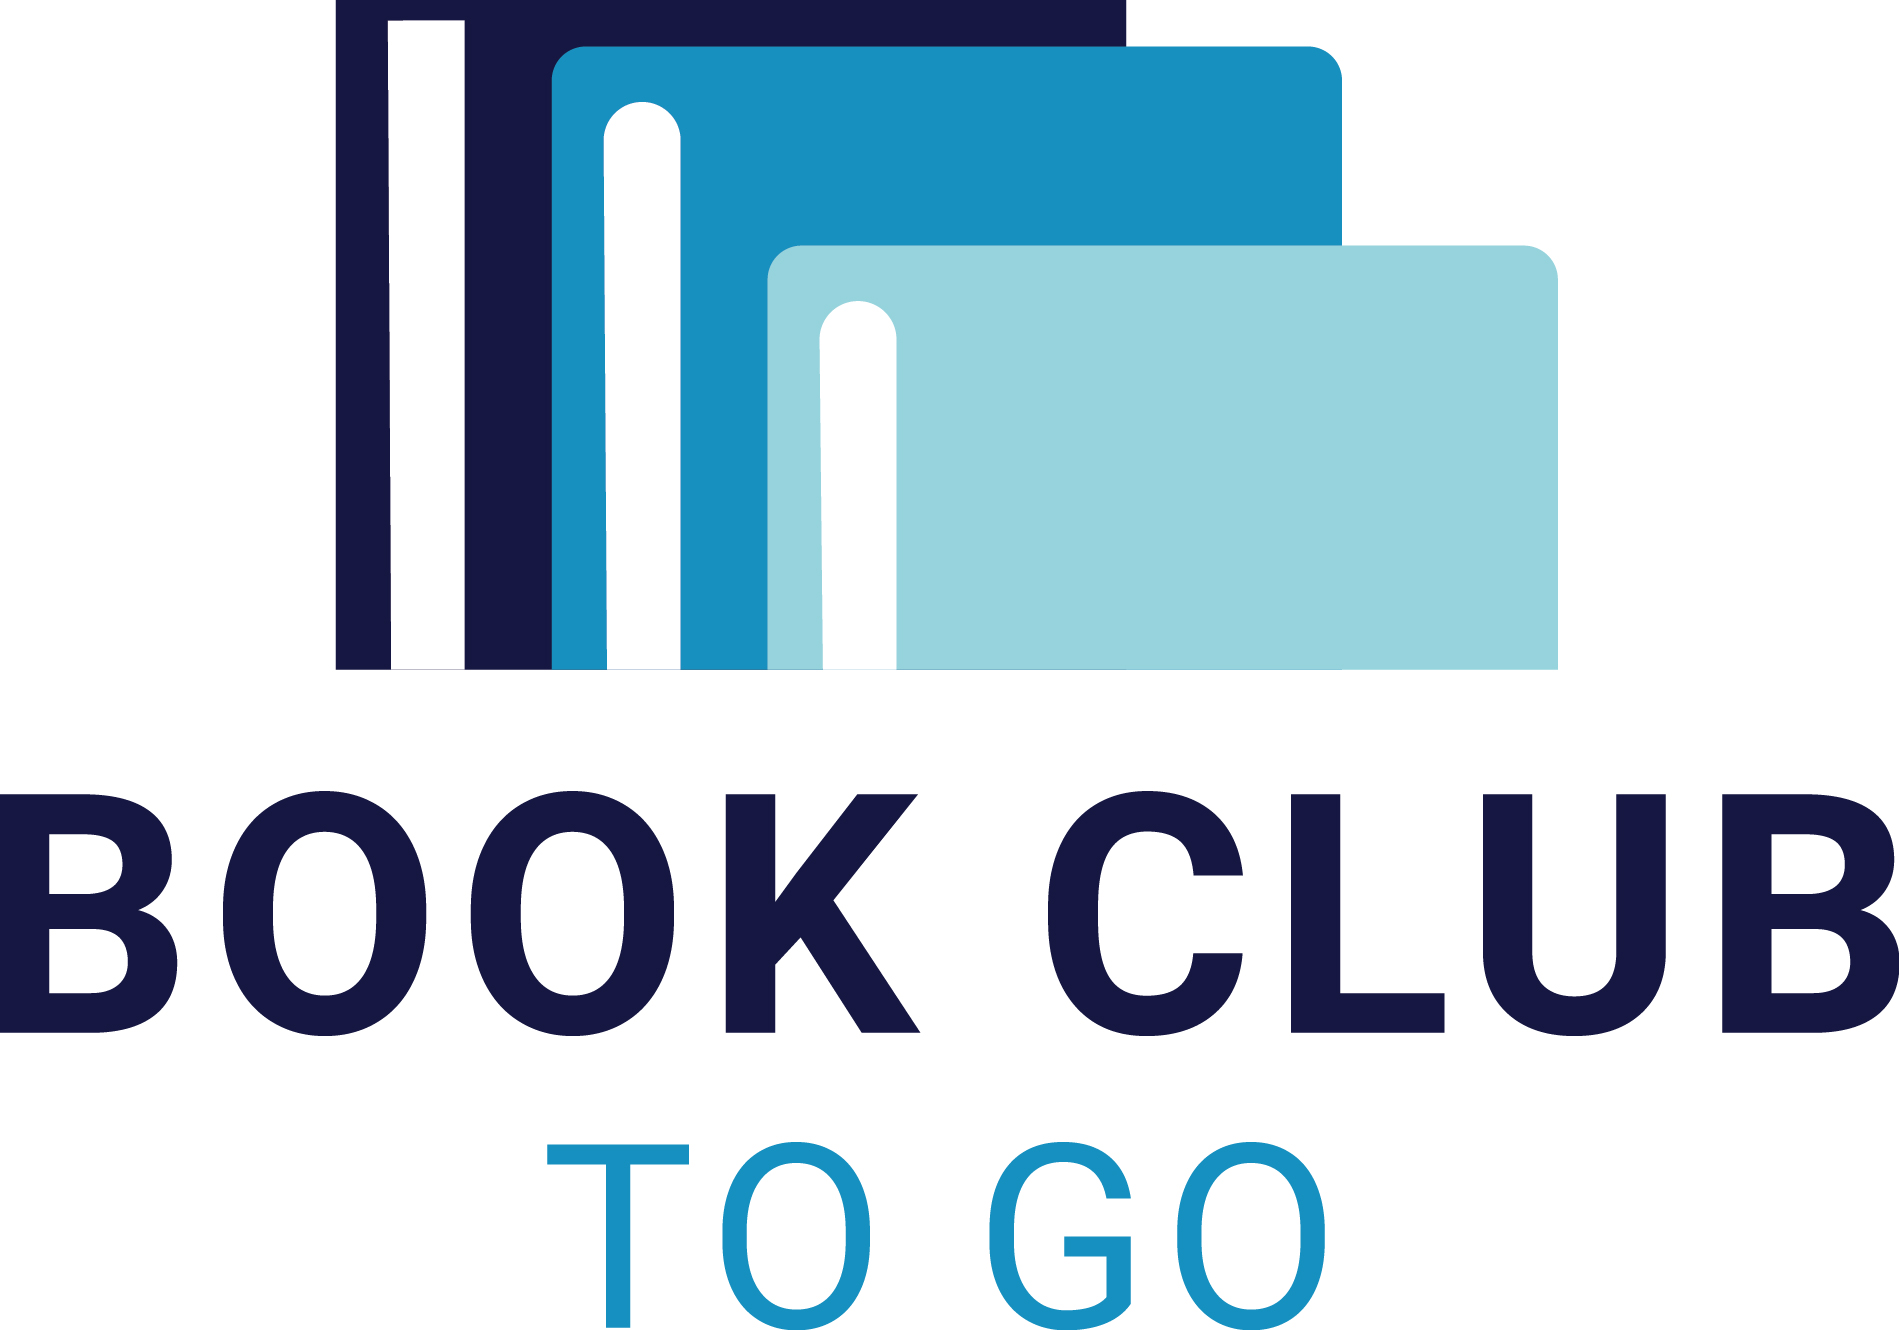 graphic with books spine up with book club to go text